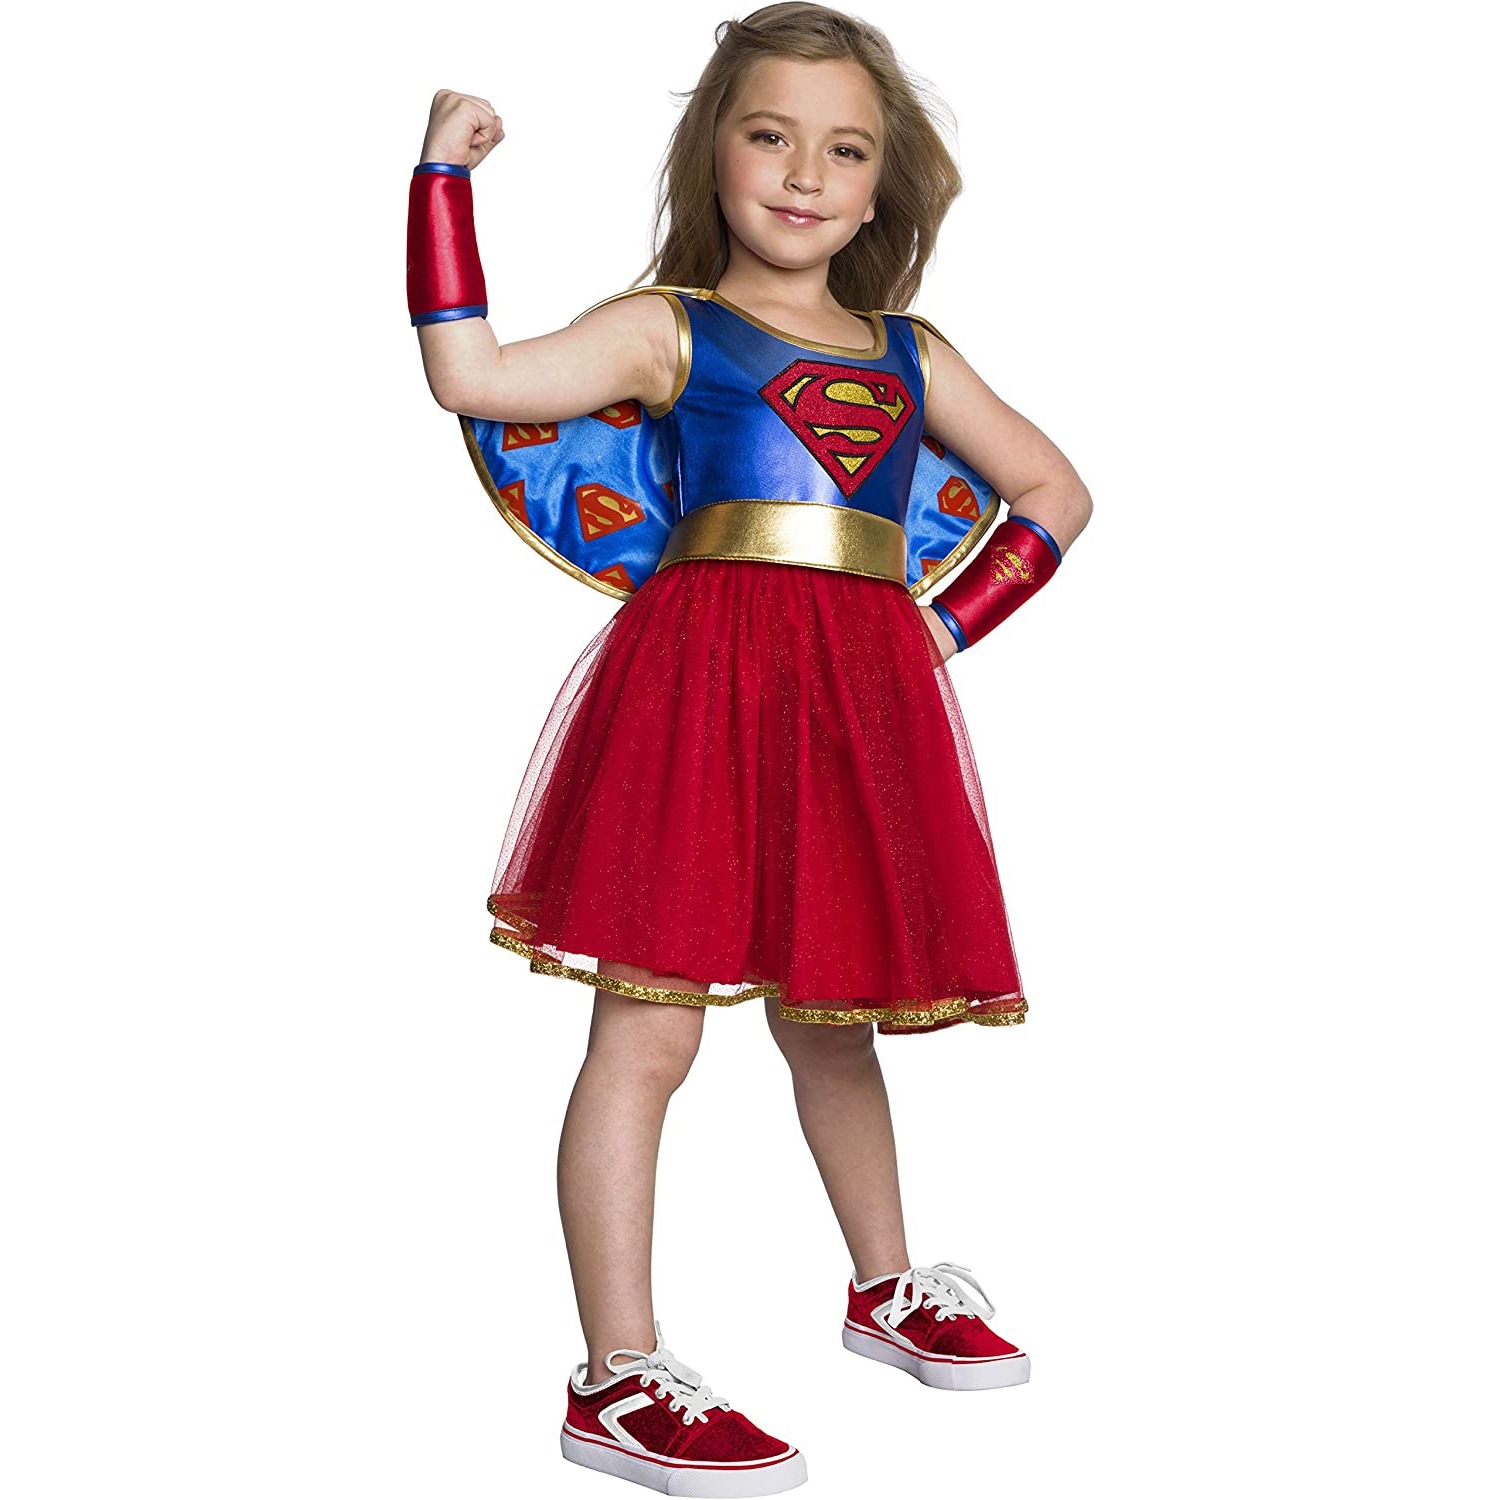 Blue and Red DCC Supergirl Tutu Dress Halloween Costume Girls 10-12 Size L